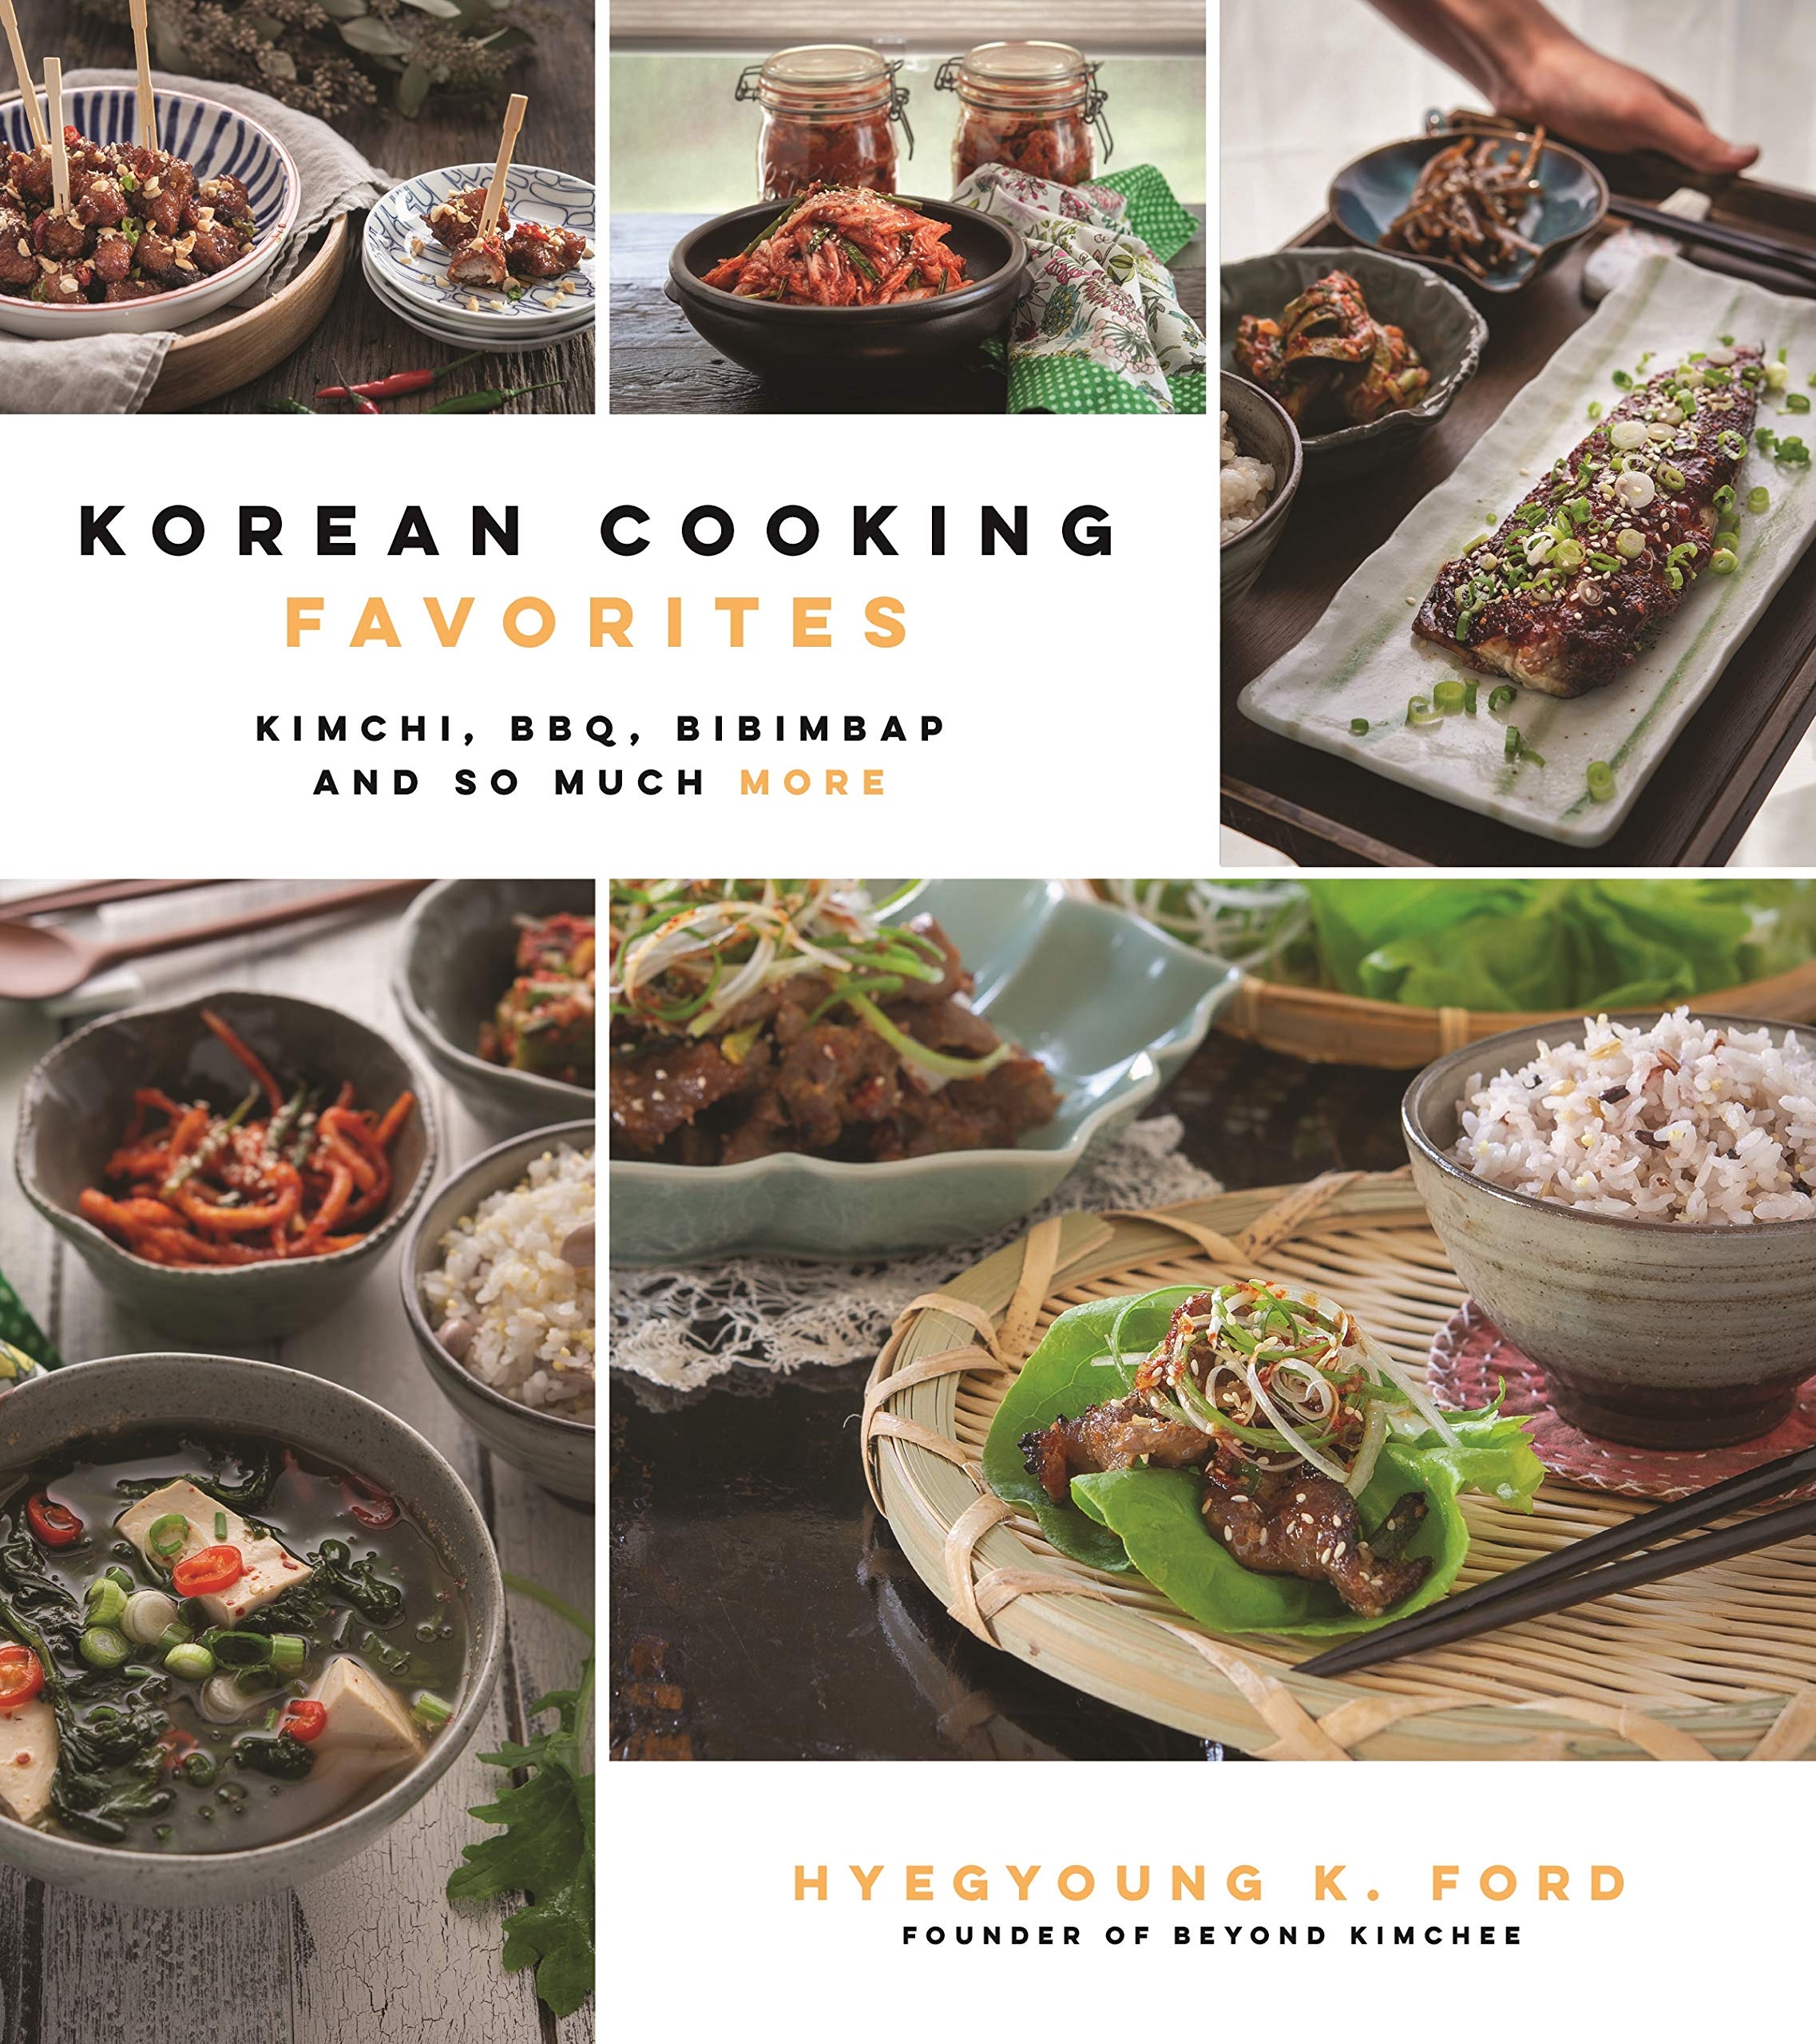 Korean Cooking Favorites | Hyegyoung K. Ford